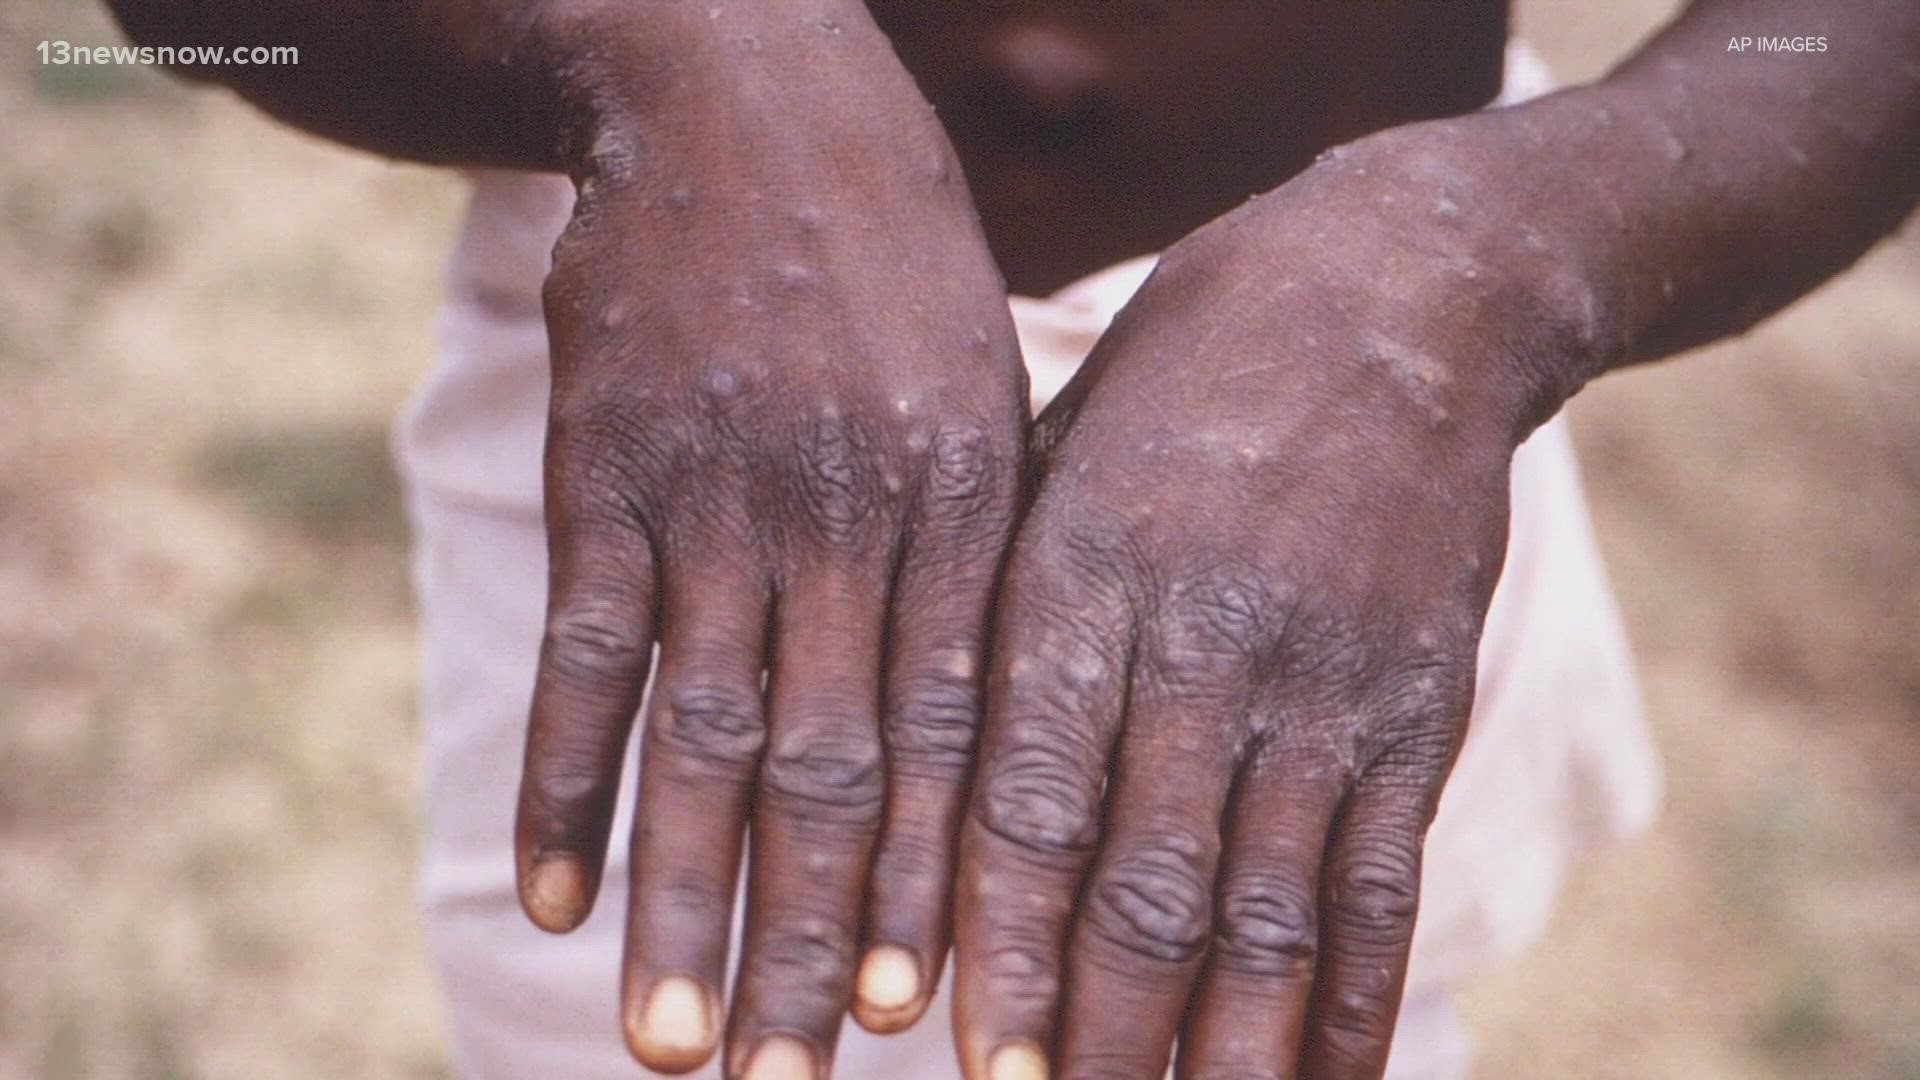 So far, there are no reported cases of monkeypox in Virginia.